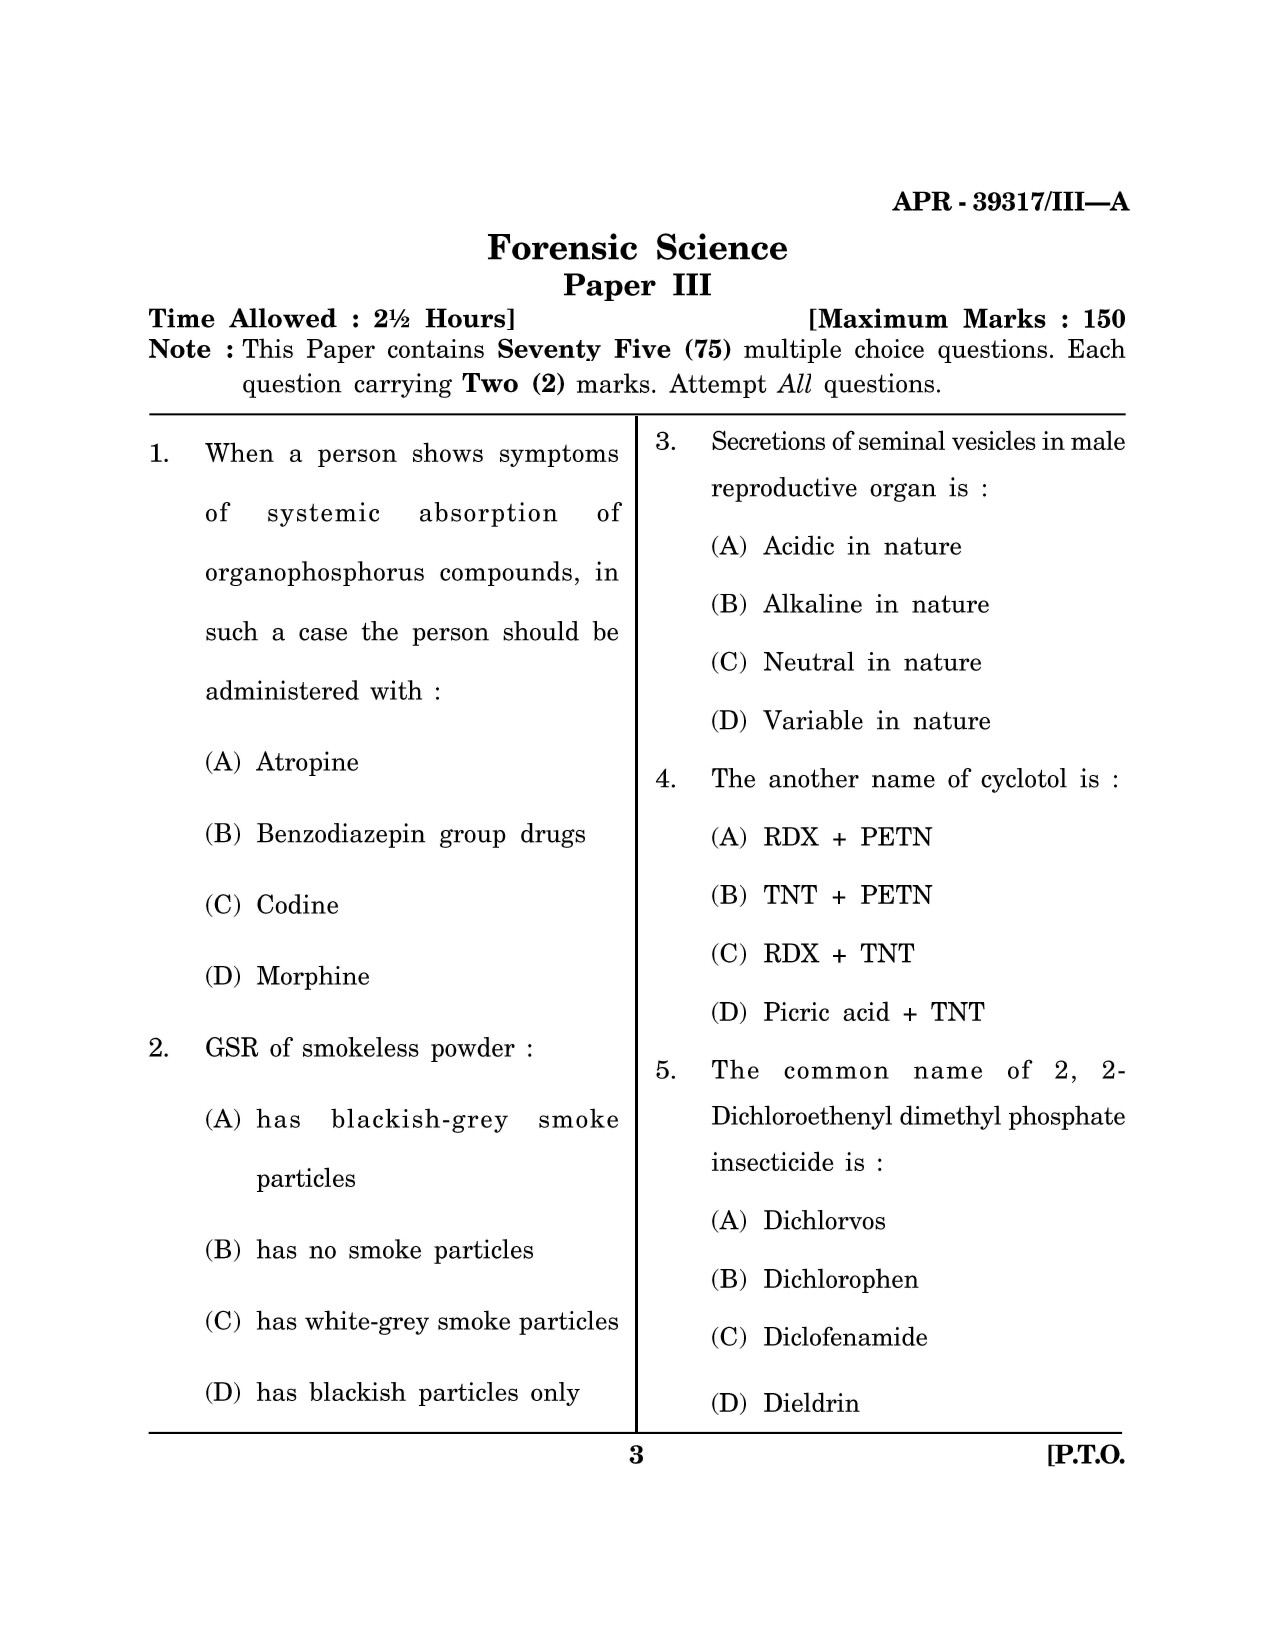 Maharashtra SET Forensic Science Question Paper III April 2017 2